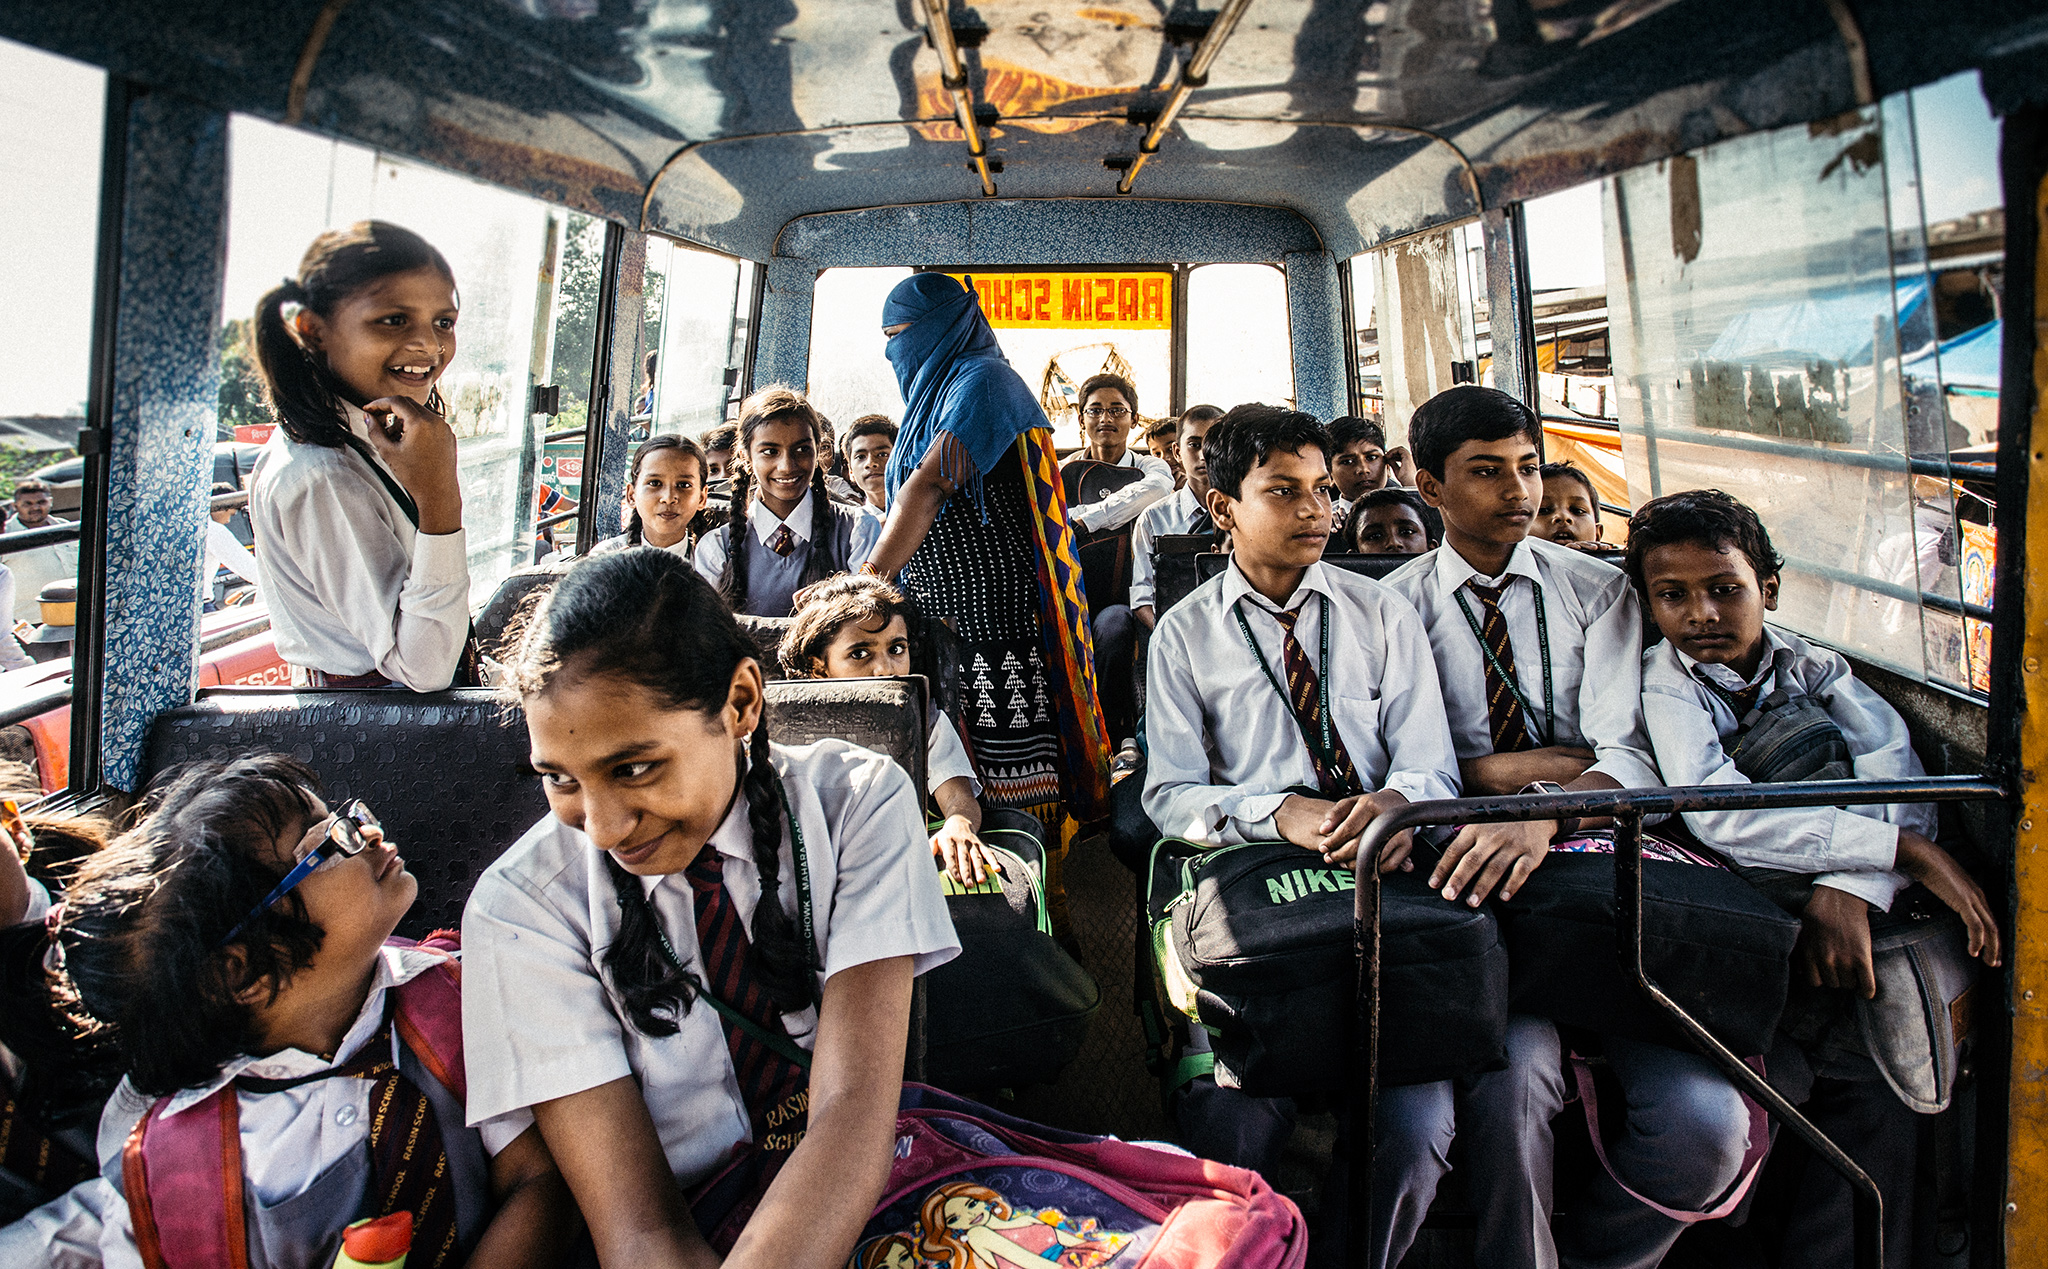 Teenagers on bus in India